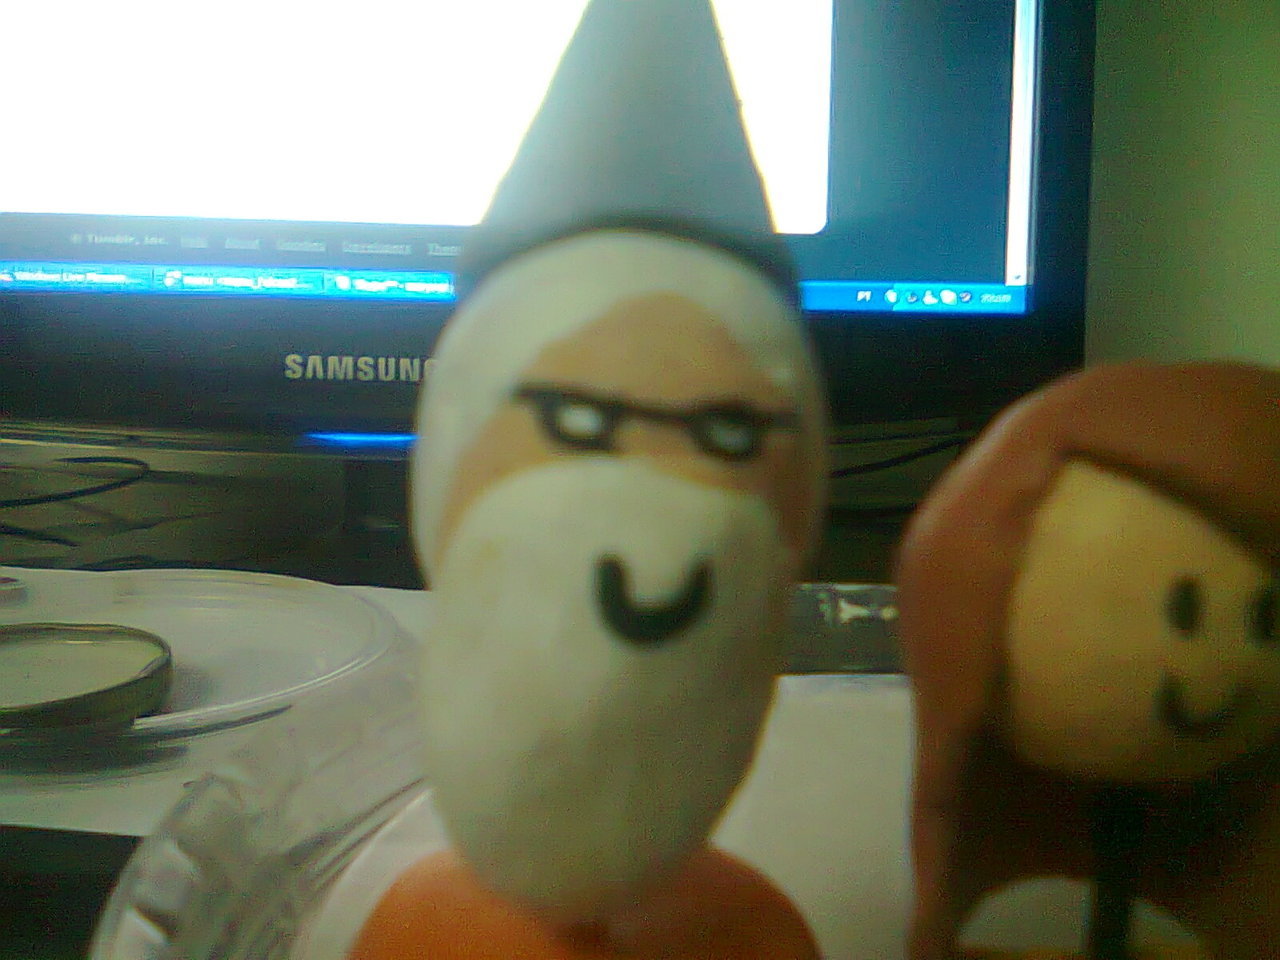  Harry Potter characters in modeling clay. 